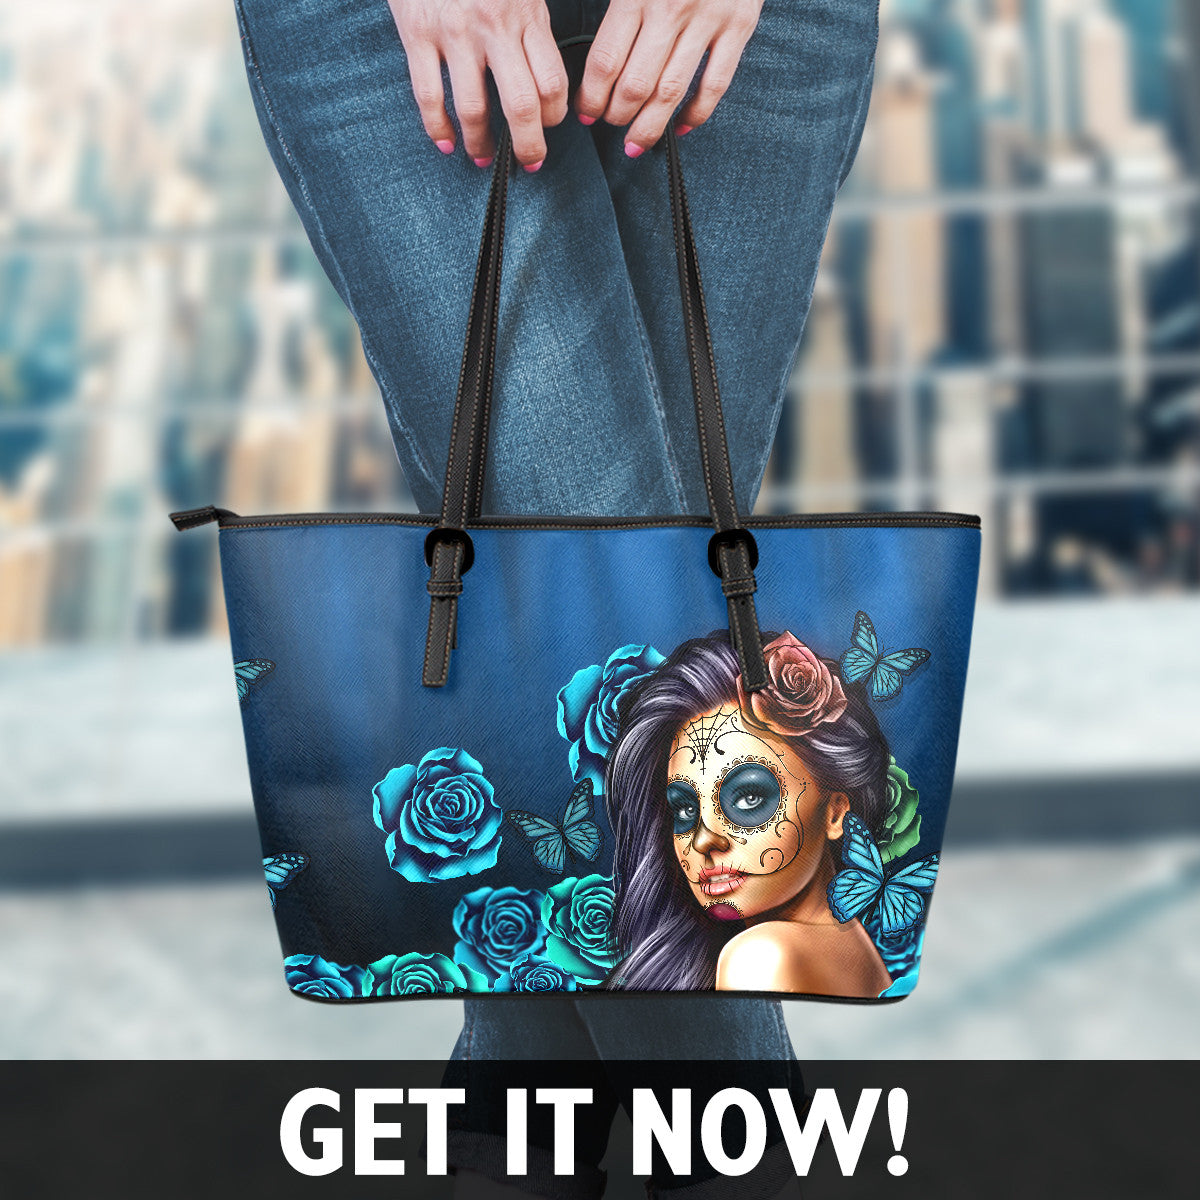 Tattoo Calavera Girl Small Leather Tote Bag - Collection 1